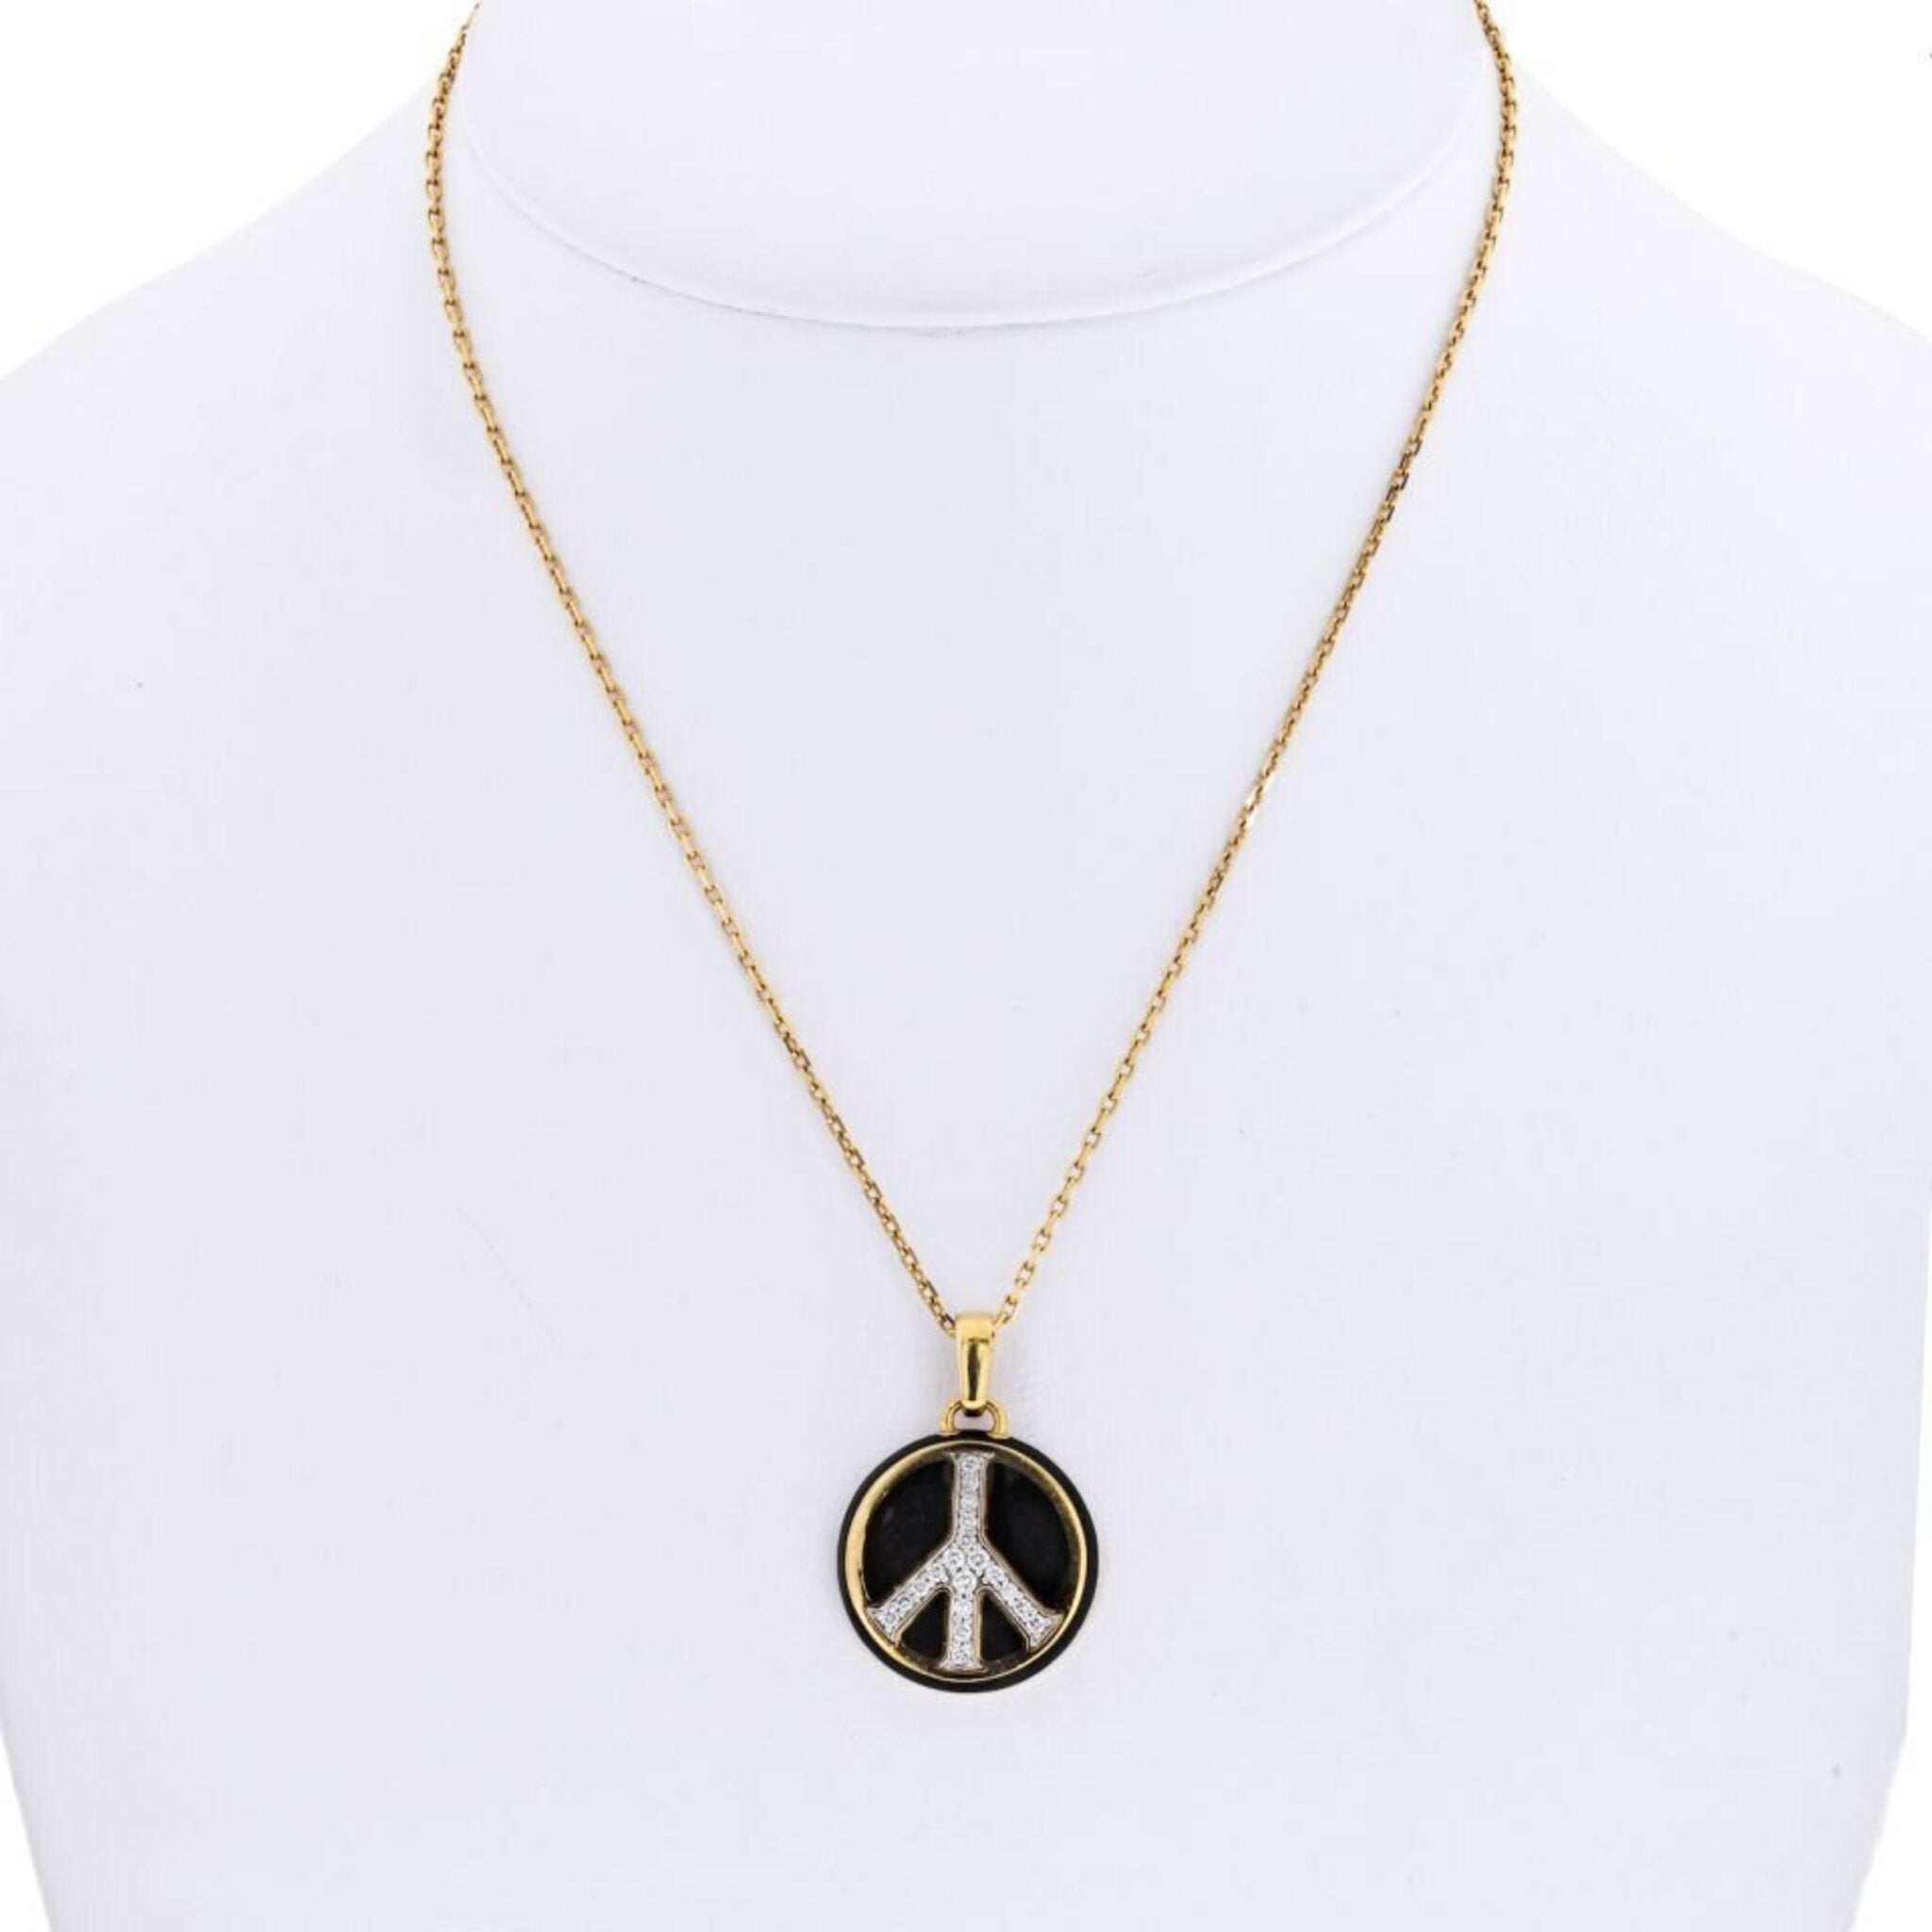 Peace necklace - LCS Fashion